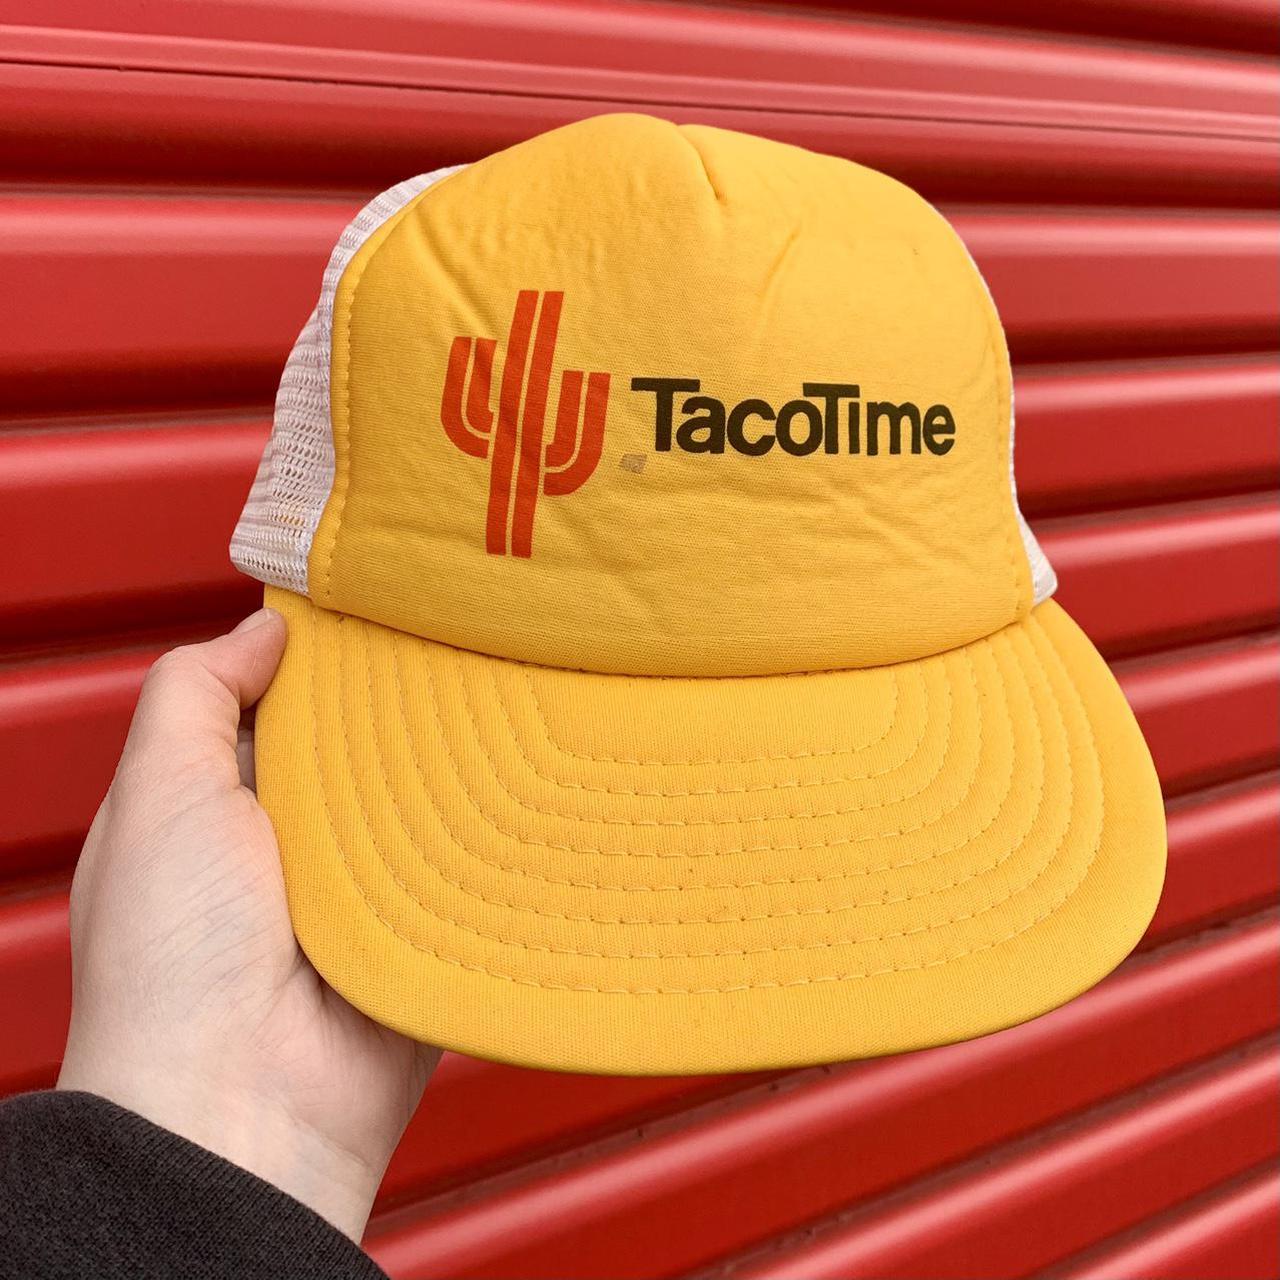 Product Image 1 - VINTAGE TACO TIME SNAPBACK 💛🌮

SUCH